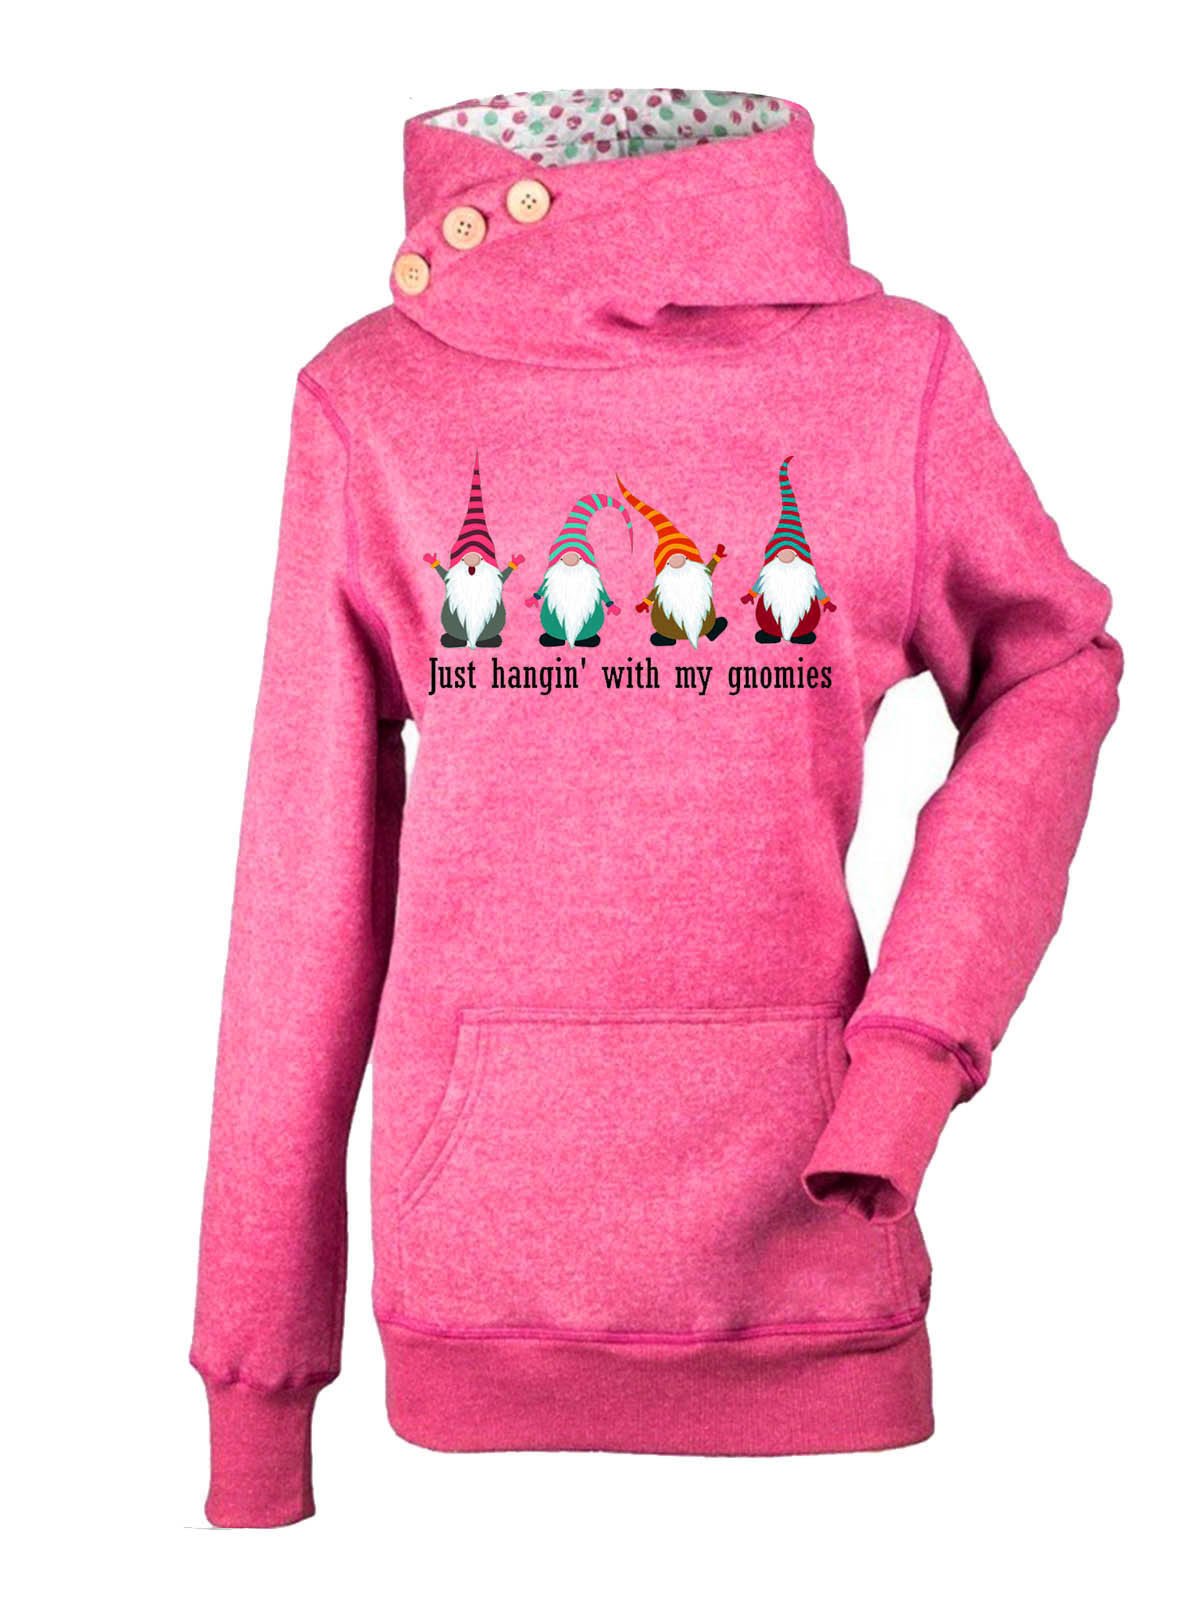 Women's Long Sleeve Turtle Neck Graphic Printed Pockets Hooded Top